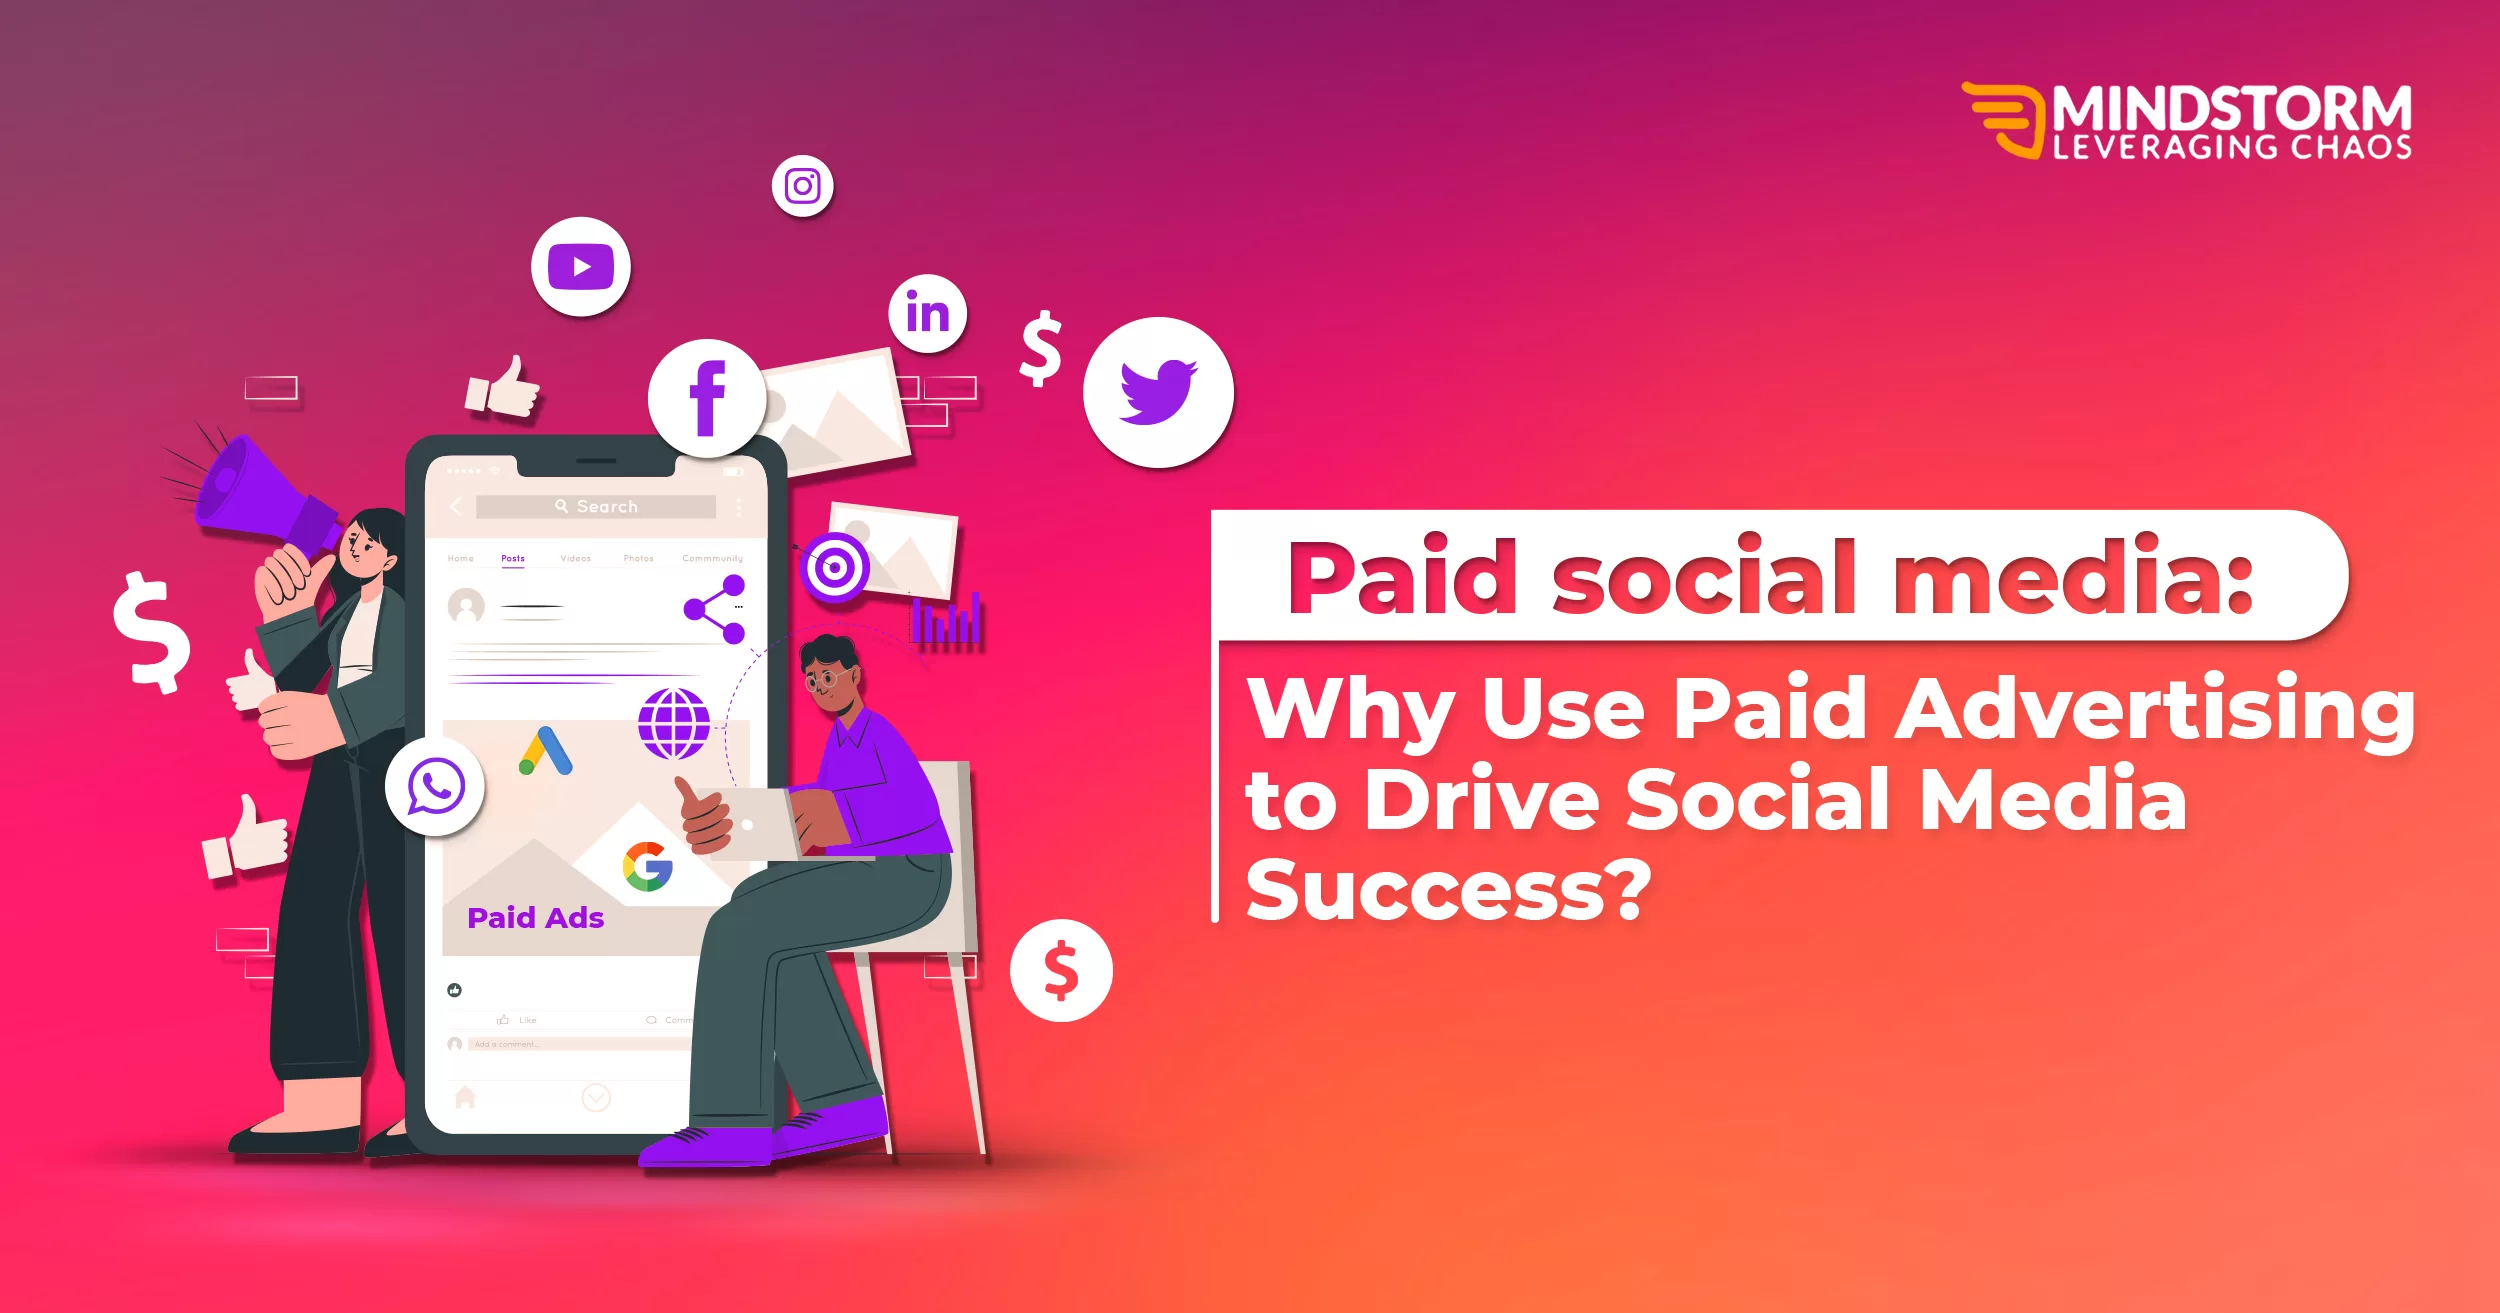 Paid social media: Why Use Paid Advertising to Drive Social Media Success?